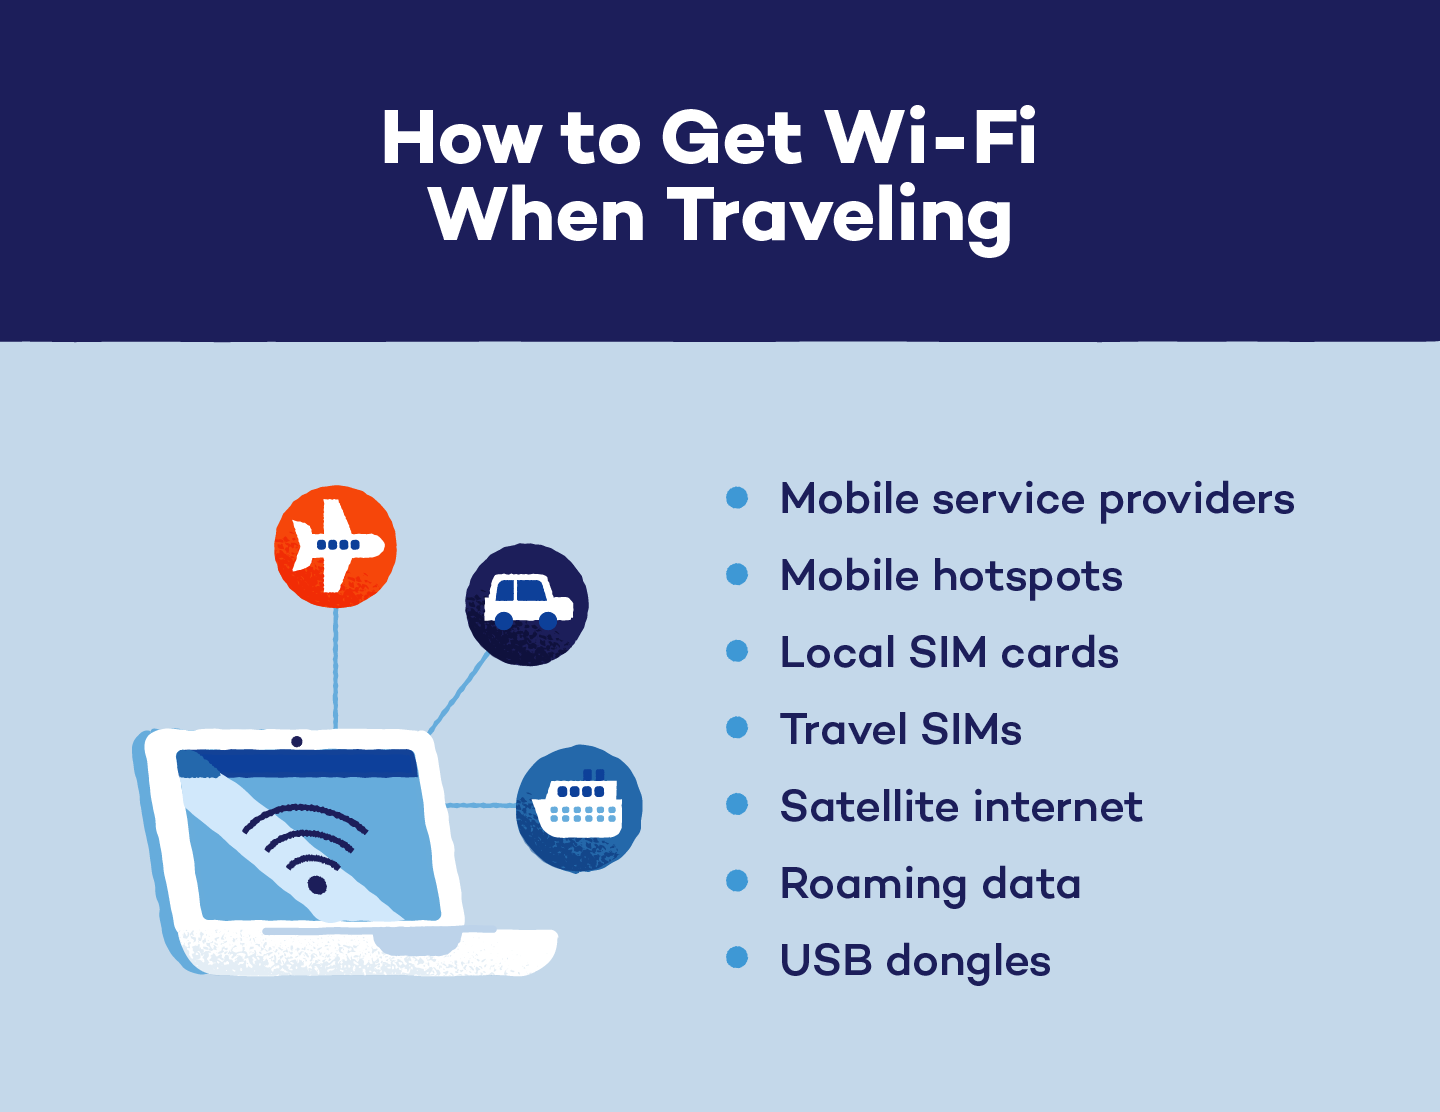 Seven ways to get Wi-Fi when traveling, including mobile hotspots and travel SIMs